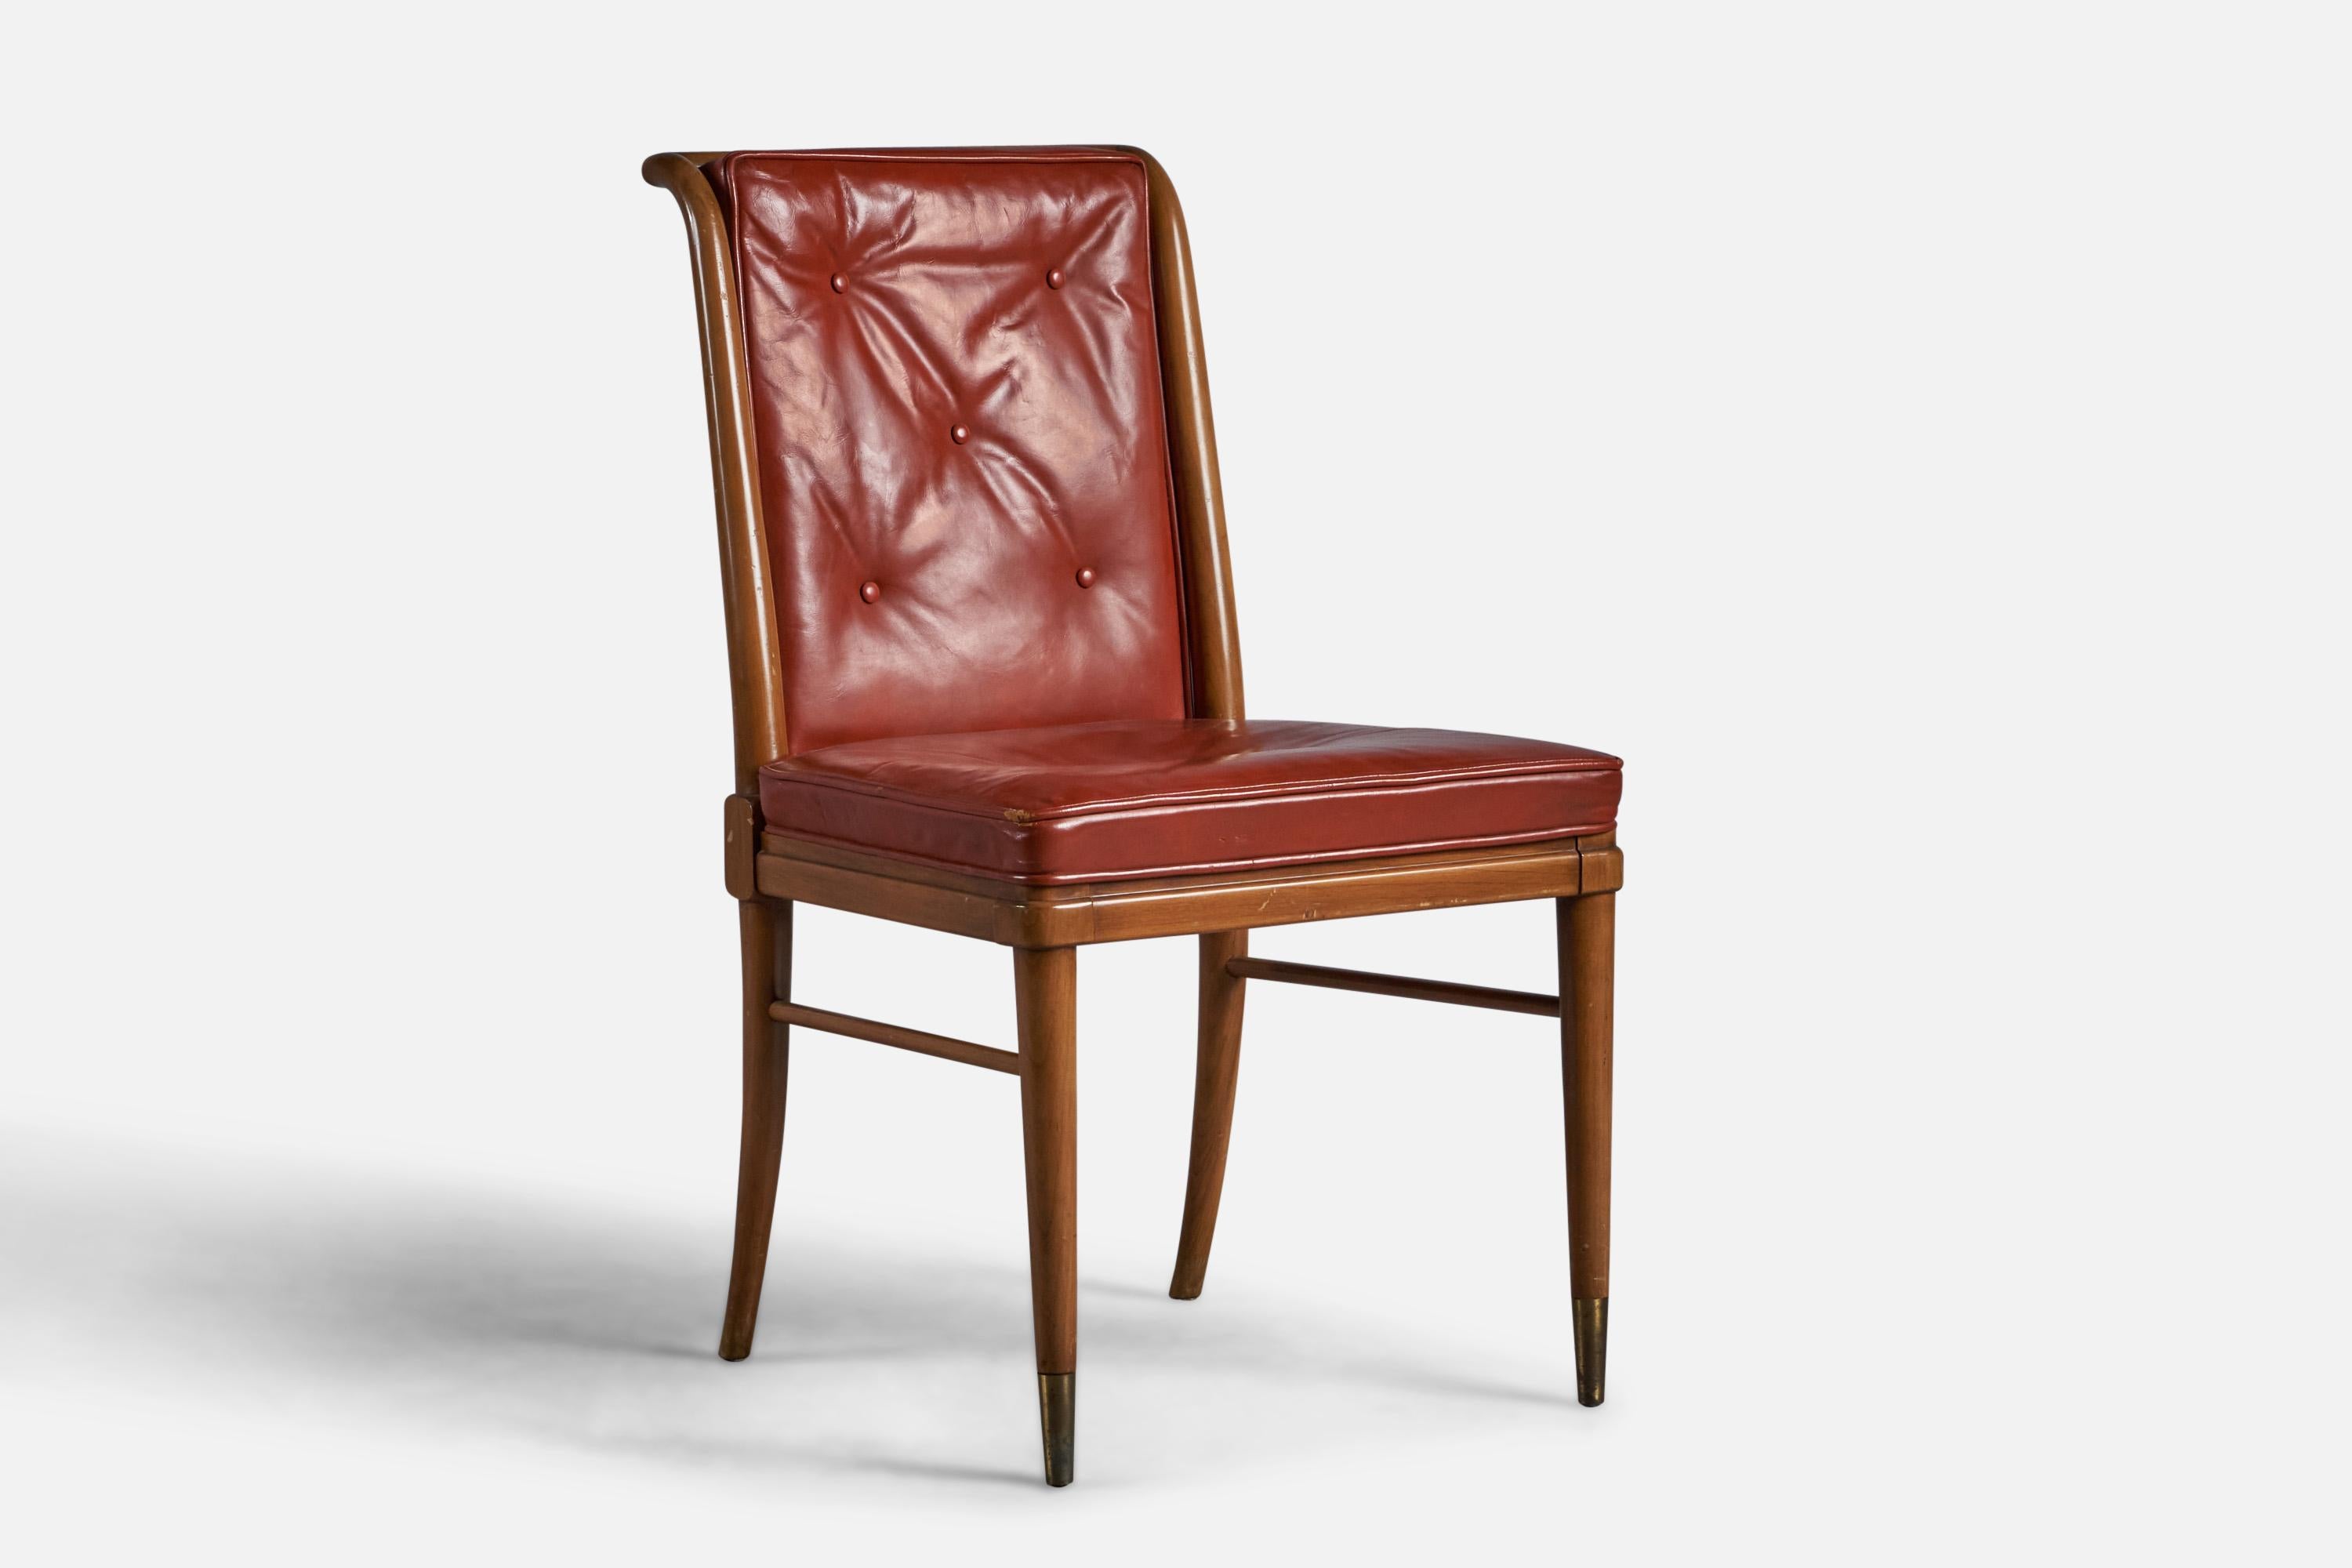 A walnut and leather side chair designed and produced by John Widdicomb, USA, c. 1940s.

18.25” seat height